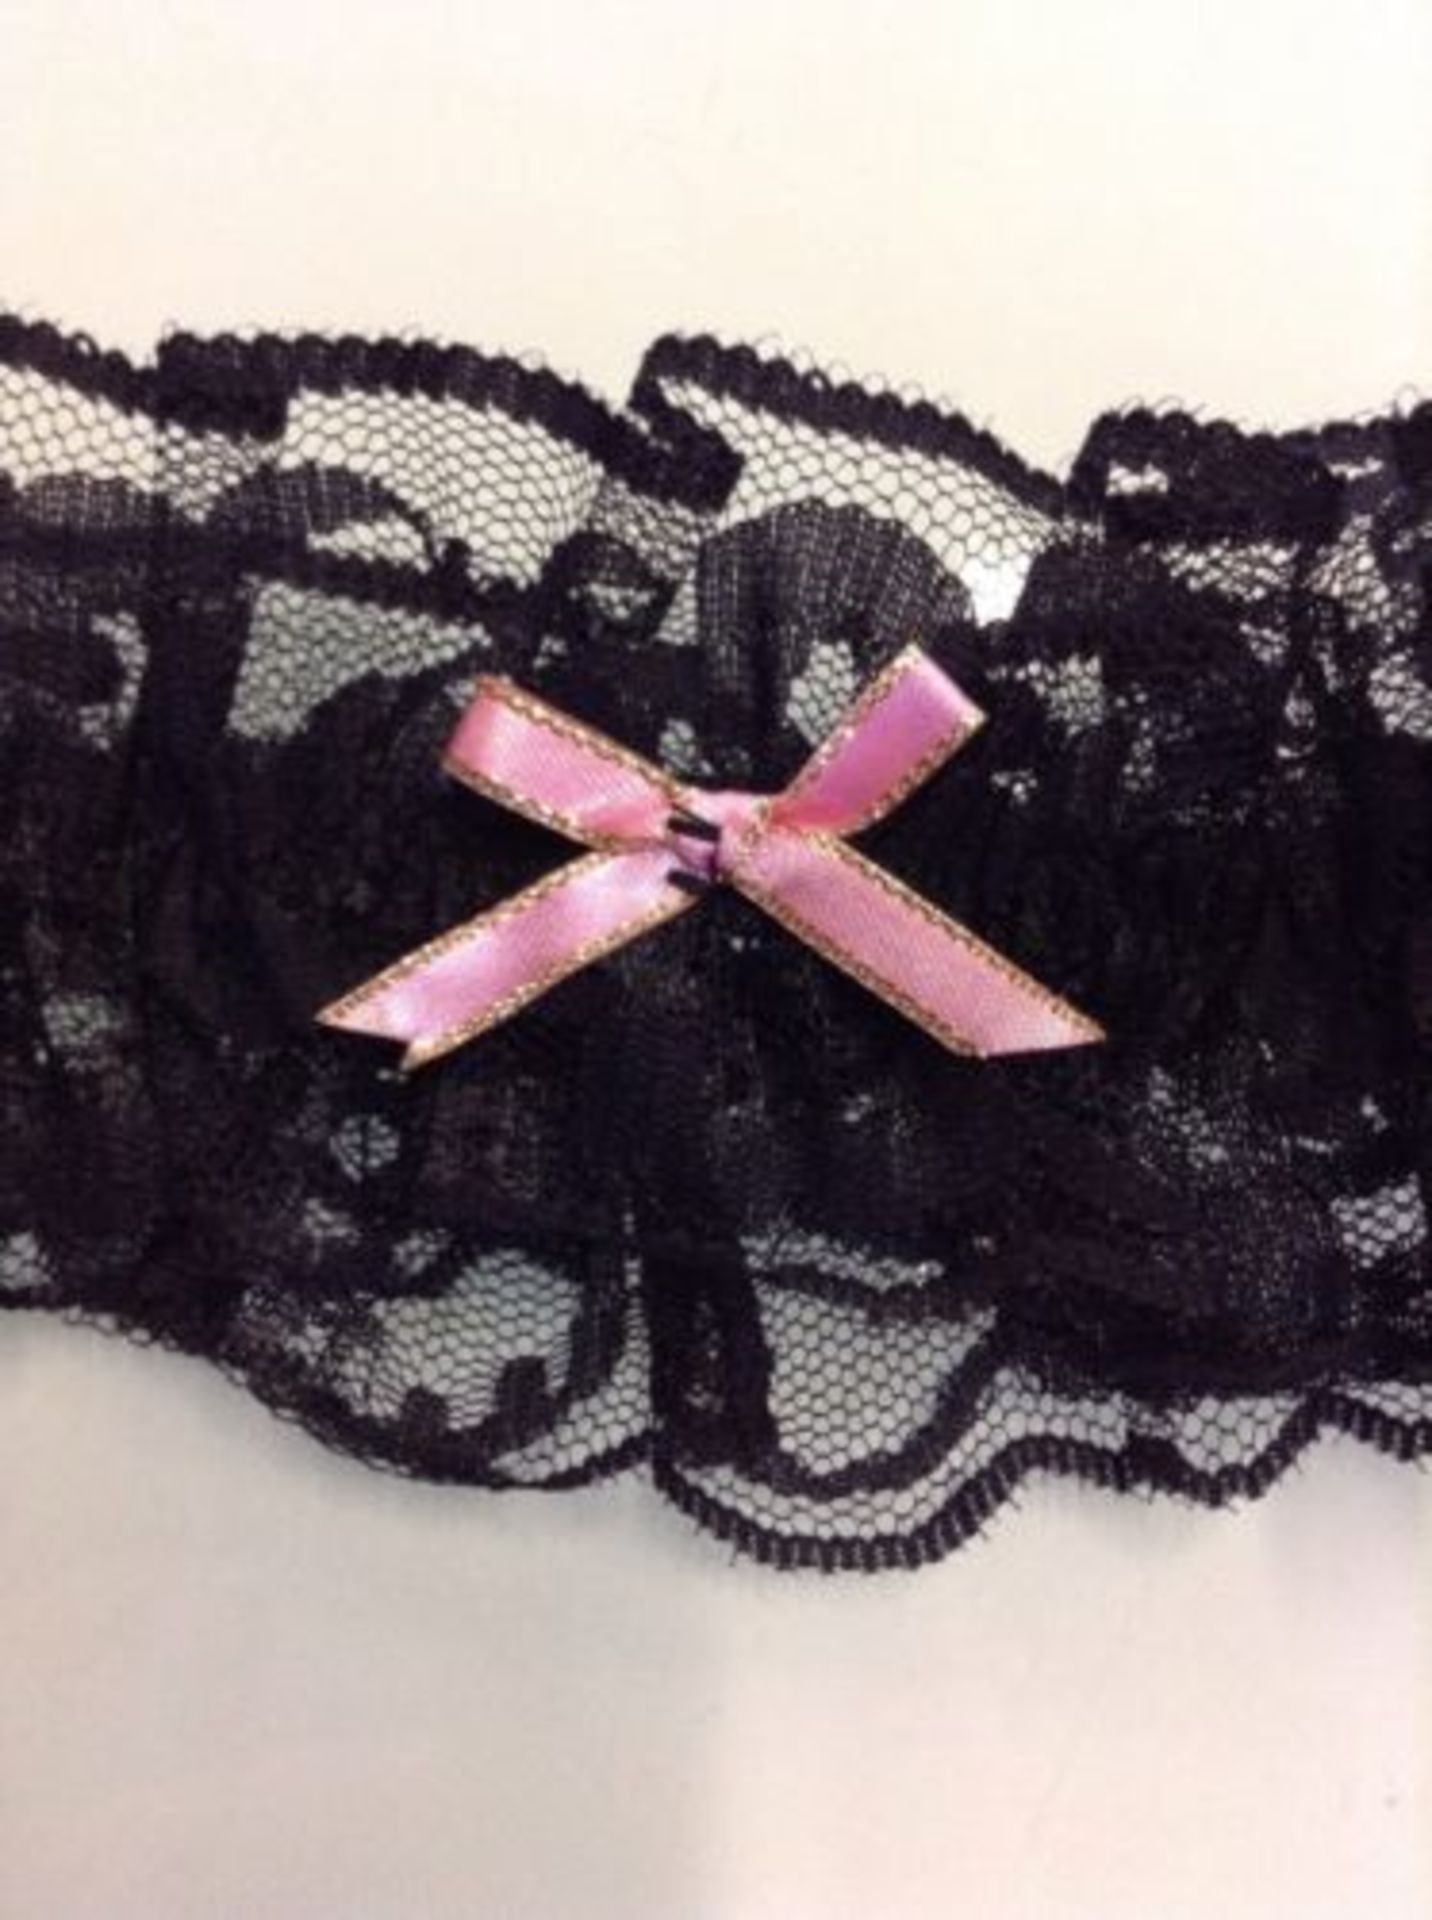 Black Garter With Pink Bow, One Size (New with tags) [Ref: ] - Image 3 of 3